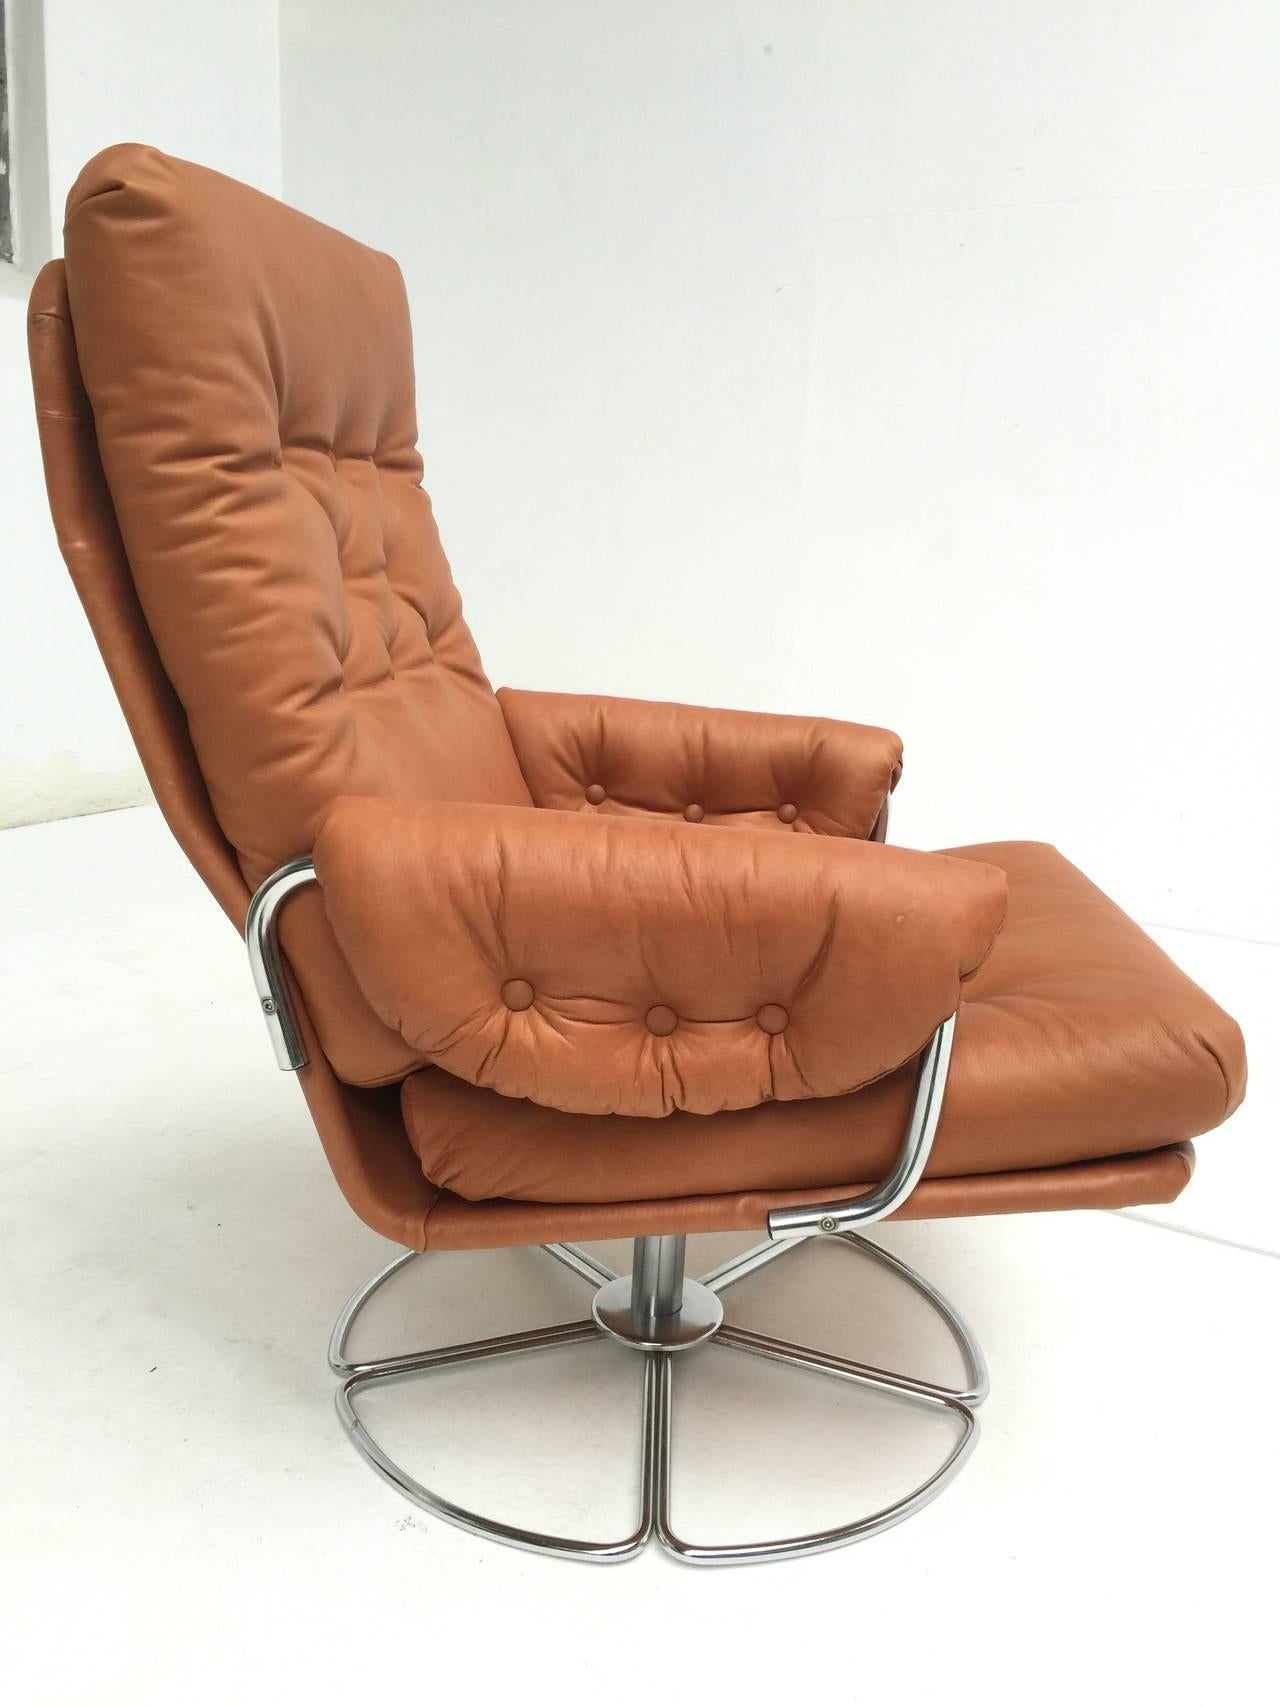 Scandinavian Modern Bruno Mathsson Leather and Chrome Swivel Easy Chair for Dux Sweden